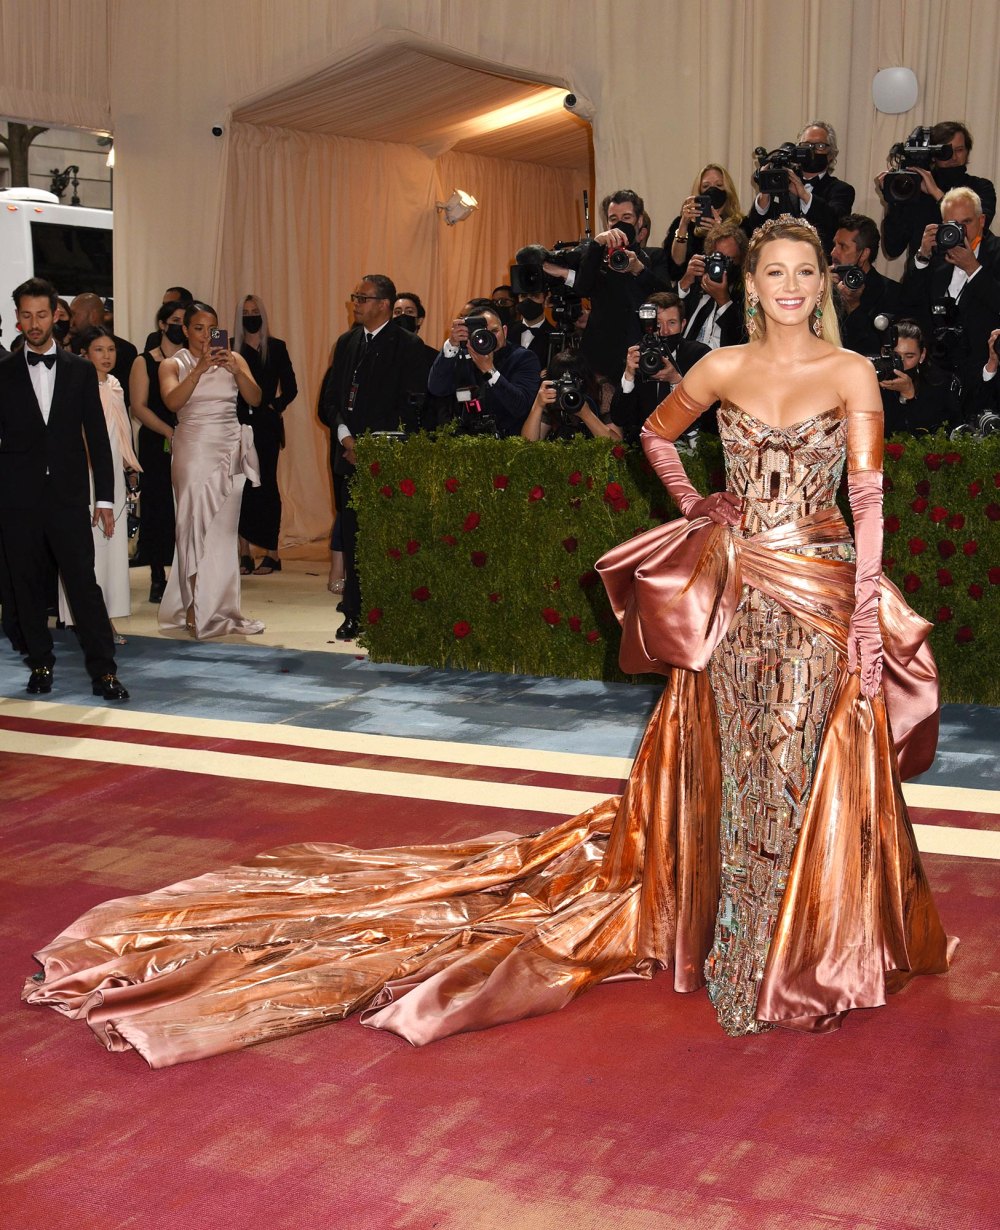 Feature Blake Lively Hops Over an Exhibit Rope to Fix Her Iconic Met Gala Dress